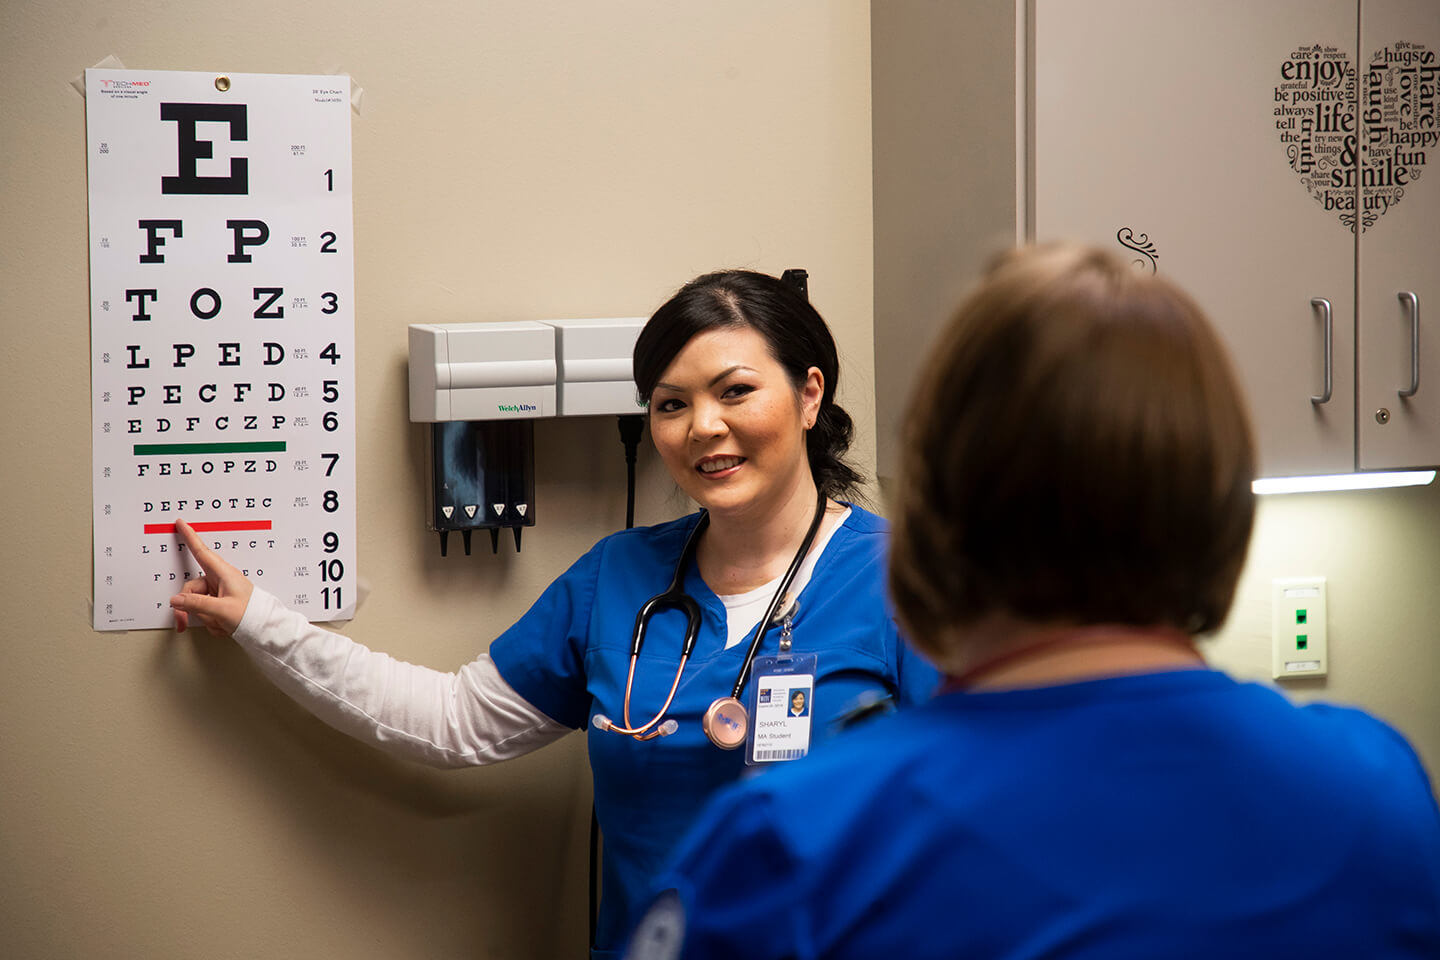 A healthcare student pointing at an eye exam chart